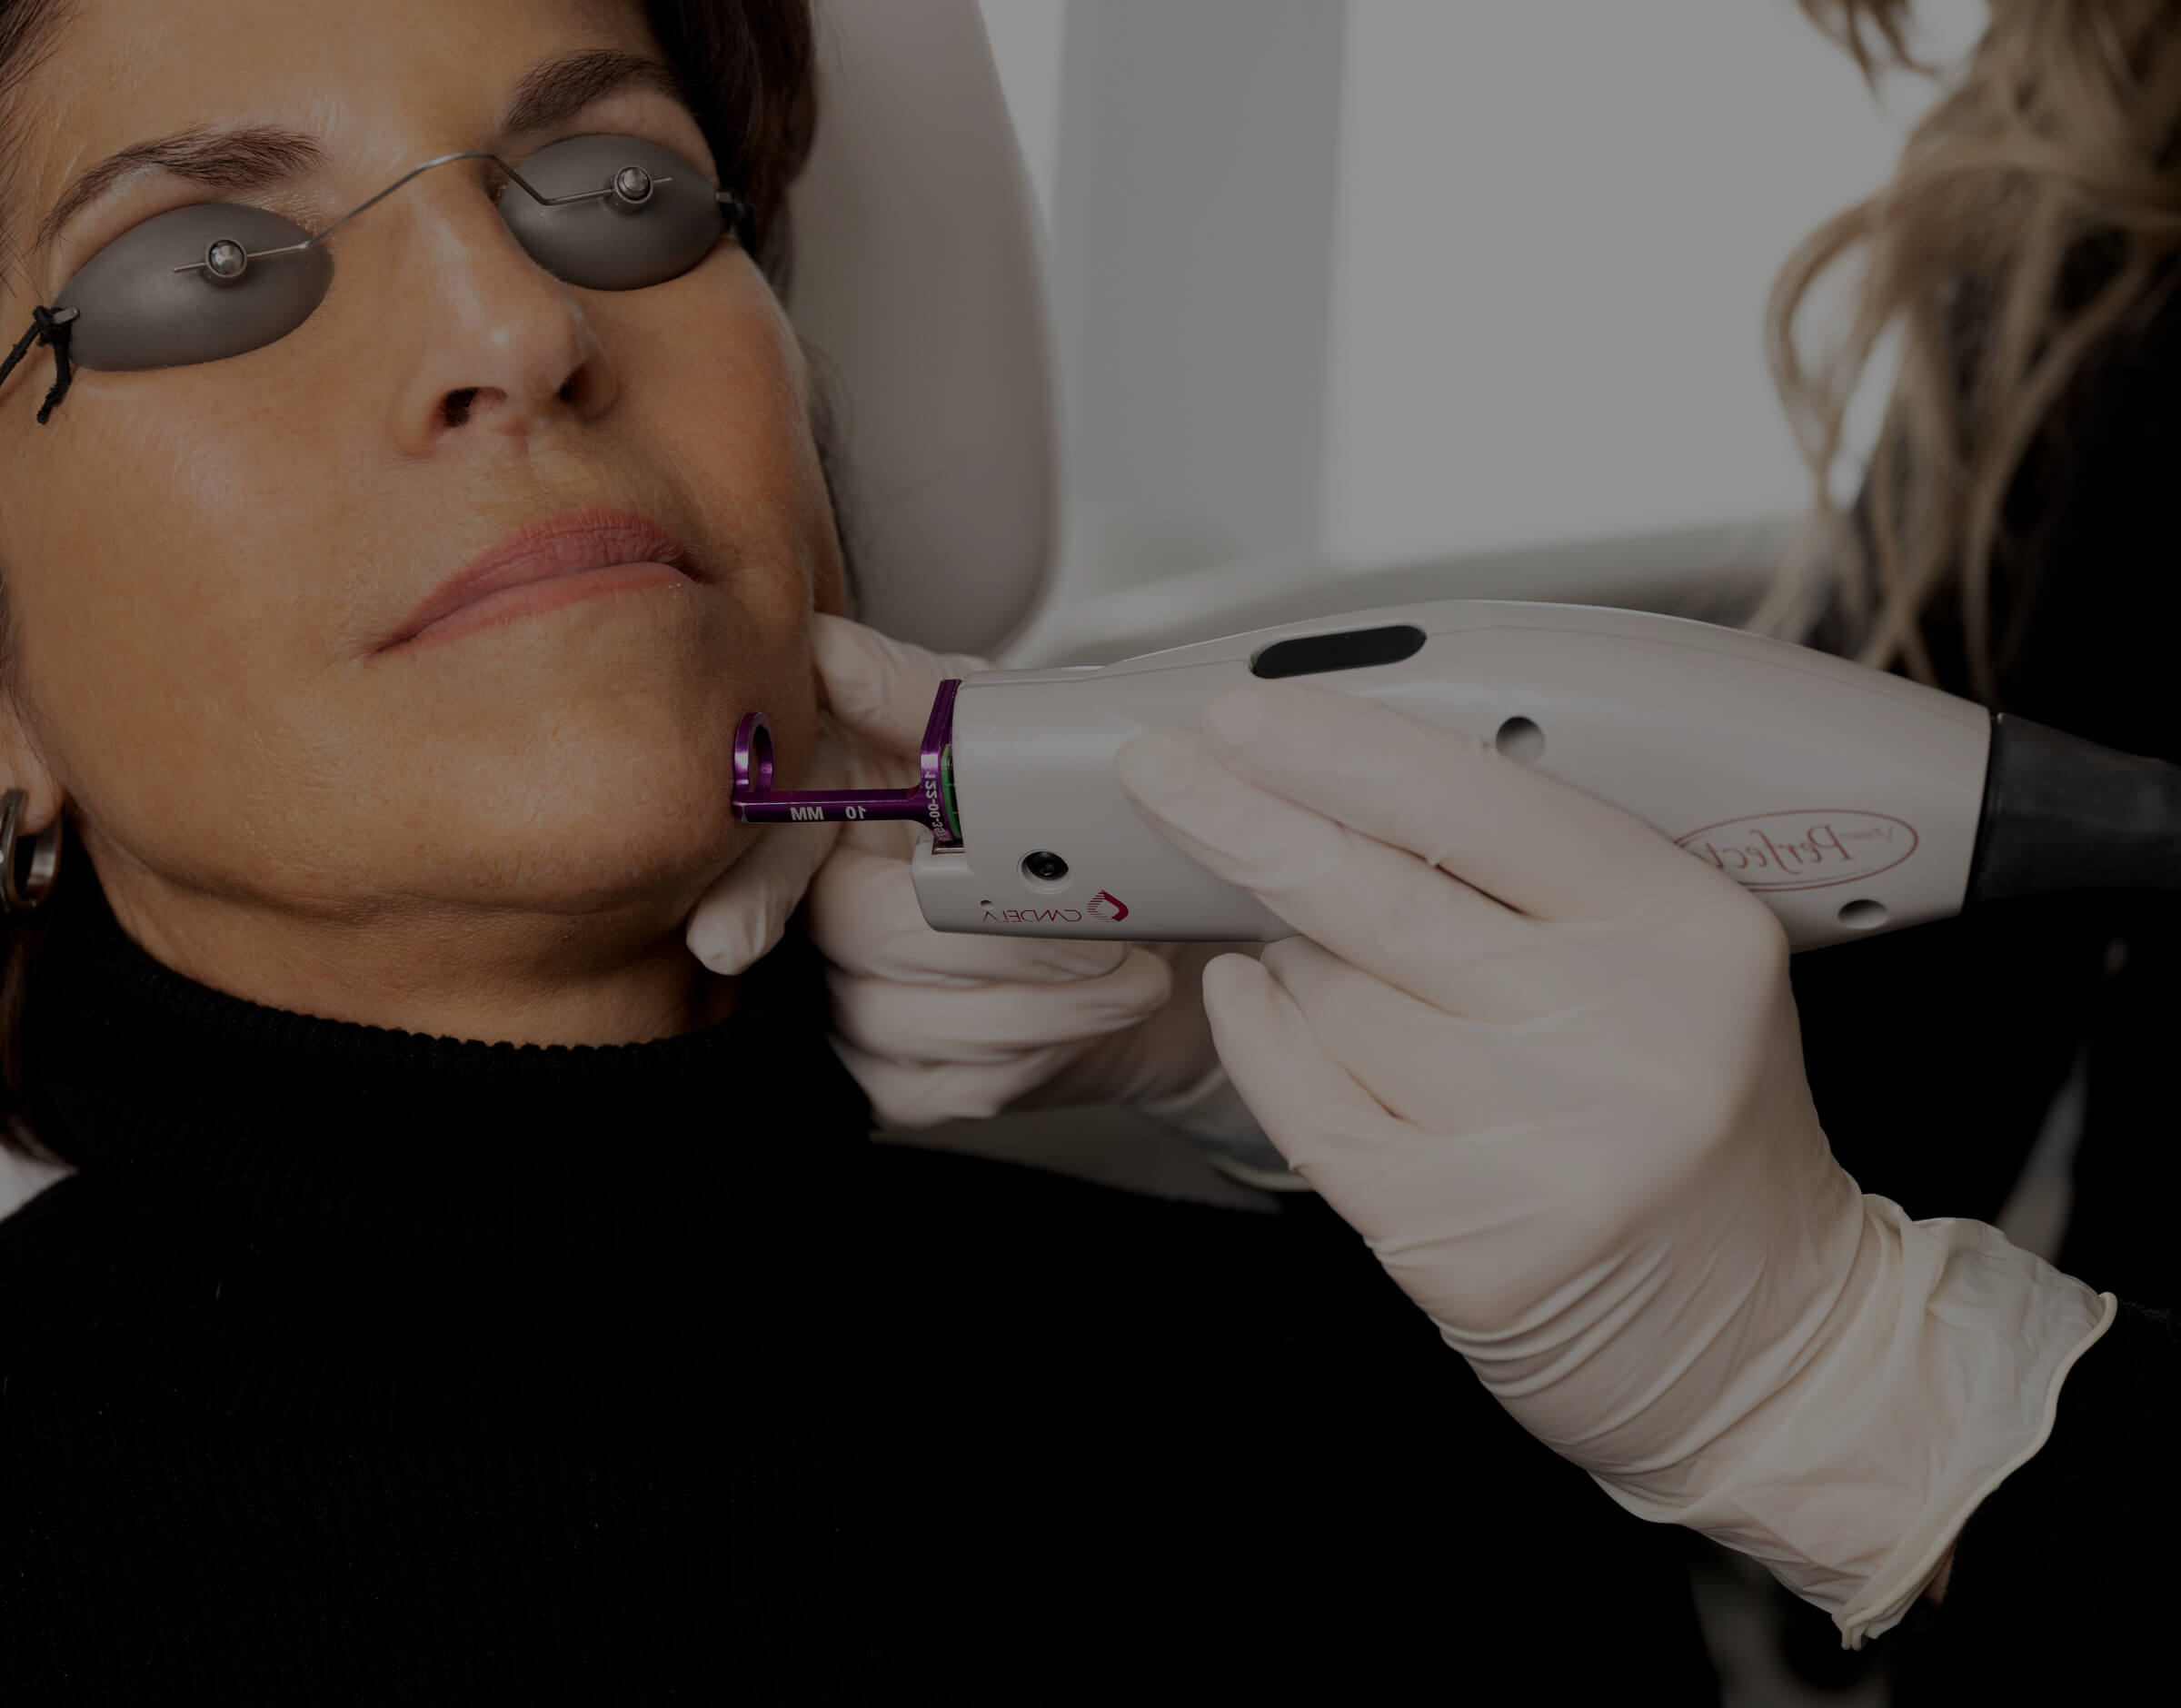 A female patient at Clinique Chloé getting treated on the face with the Vbeam laser